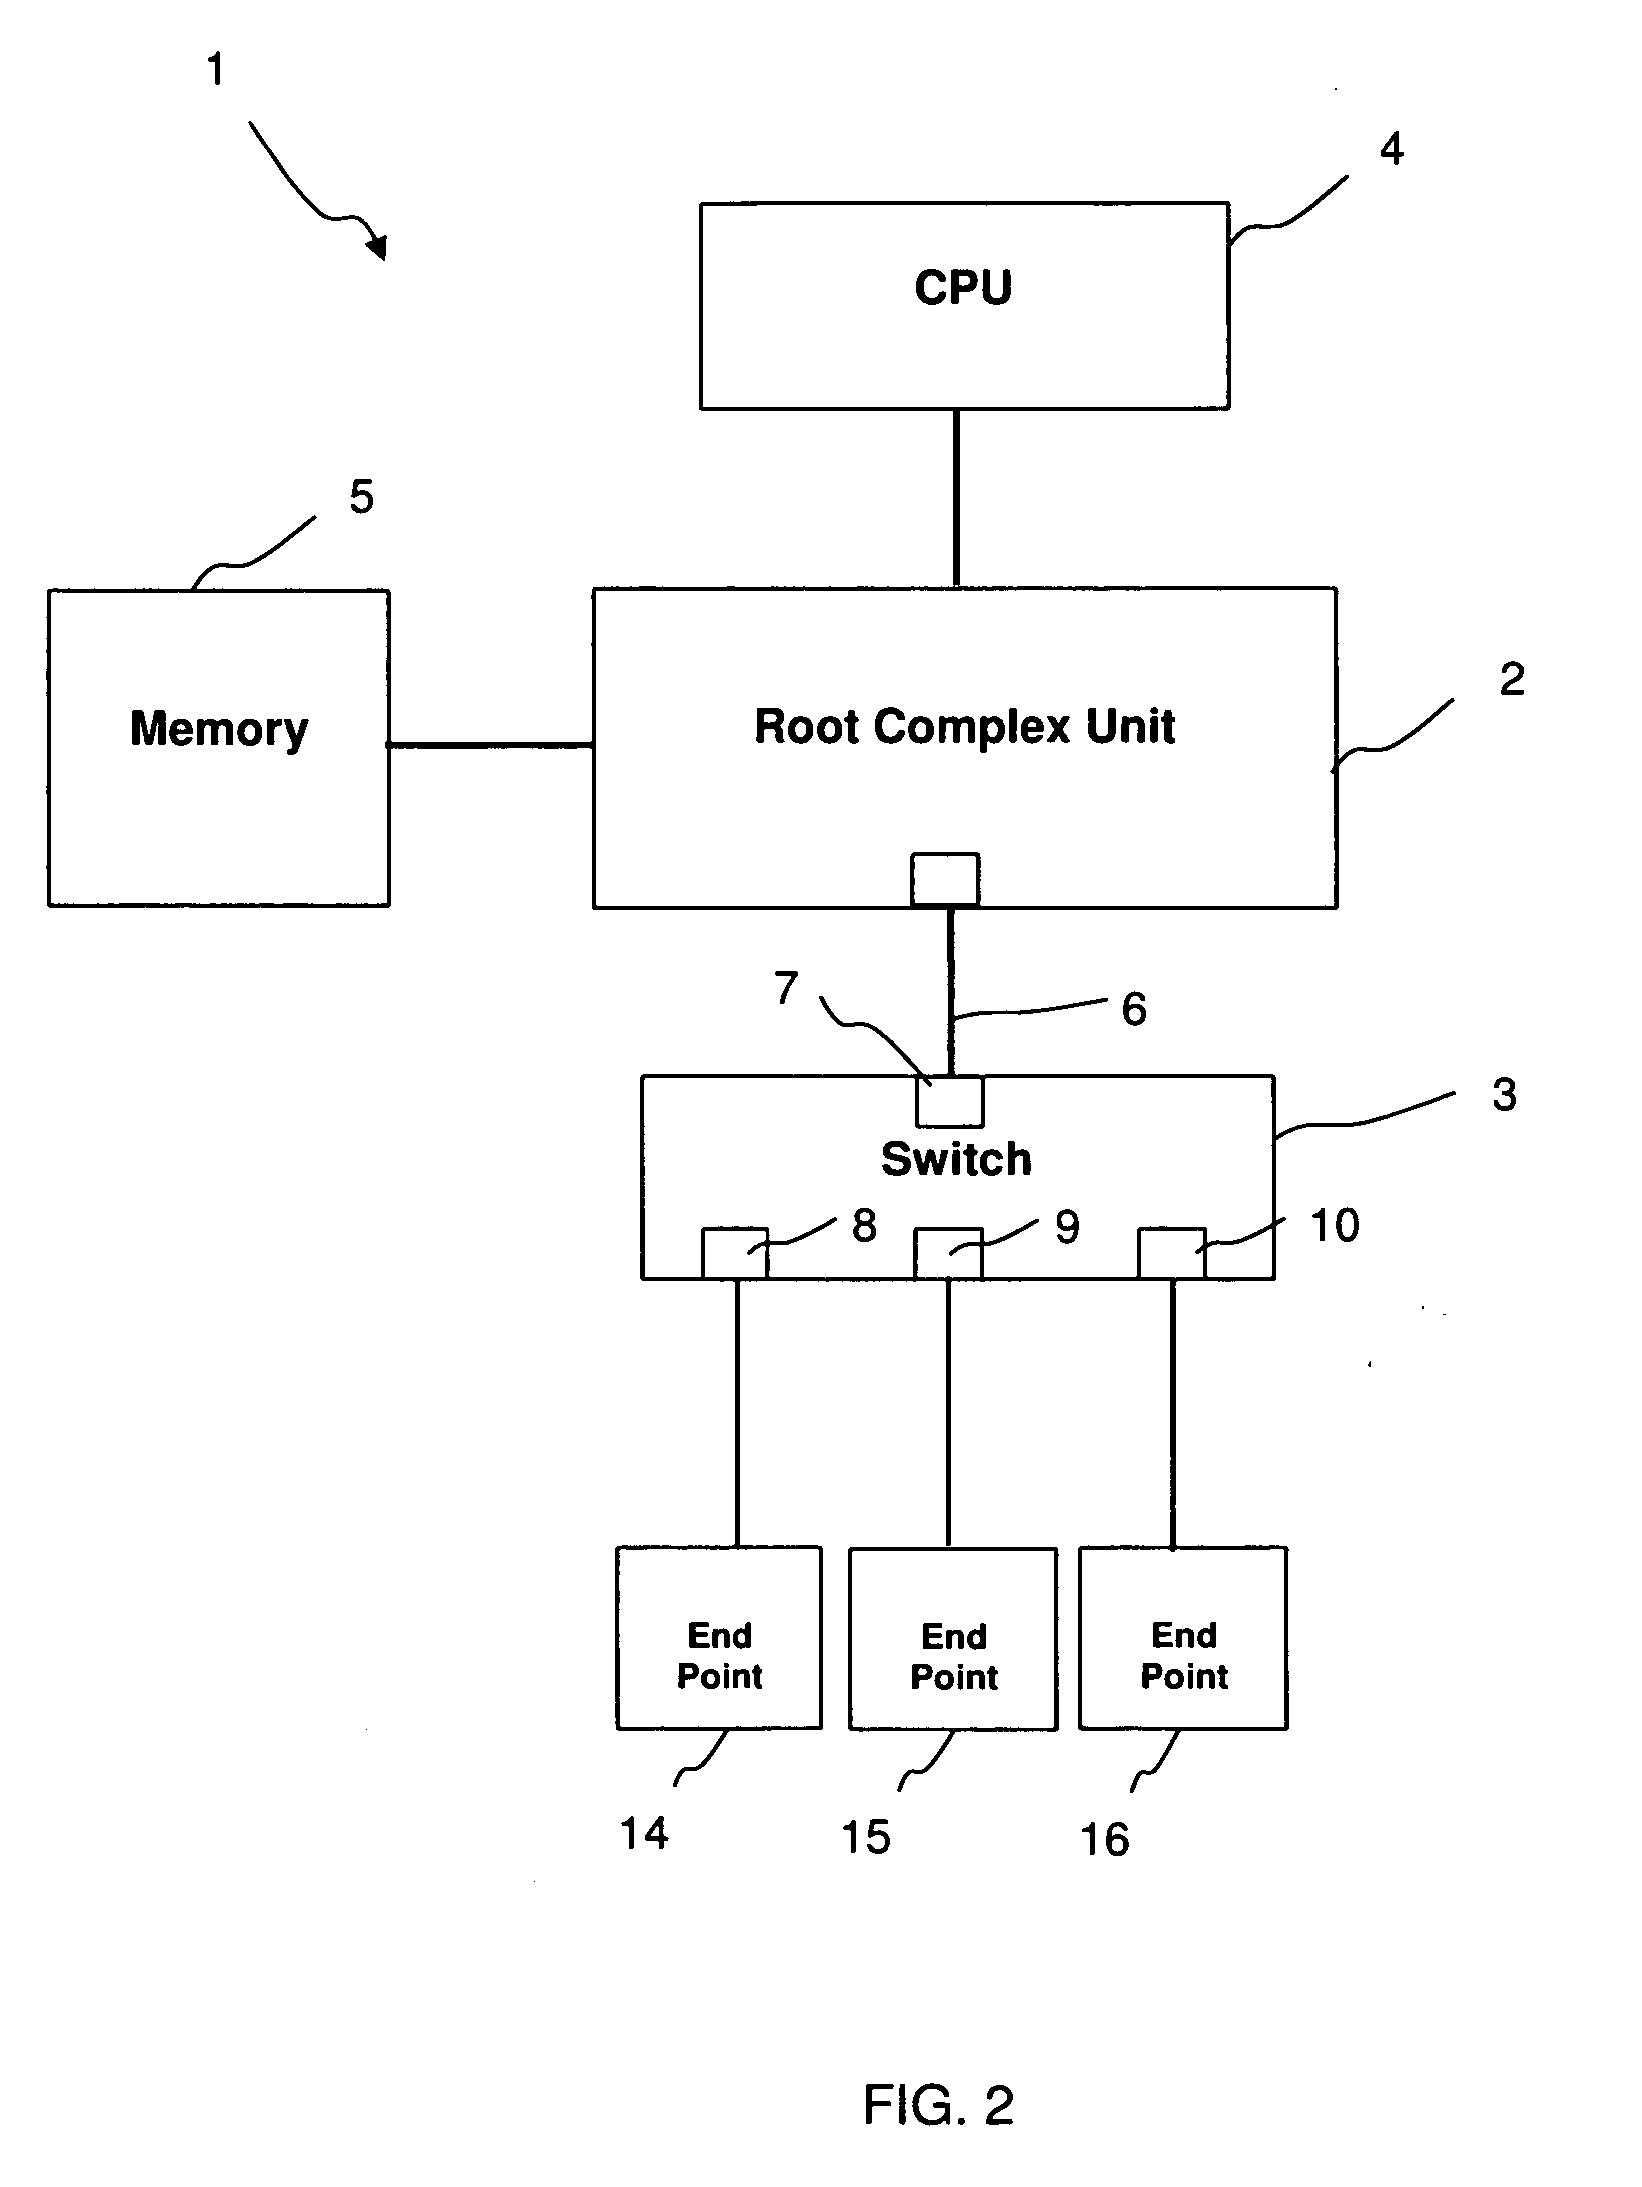 Method and system for transferring packets between devices connected to a PCI-Express bus